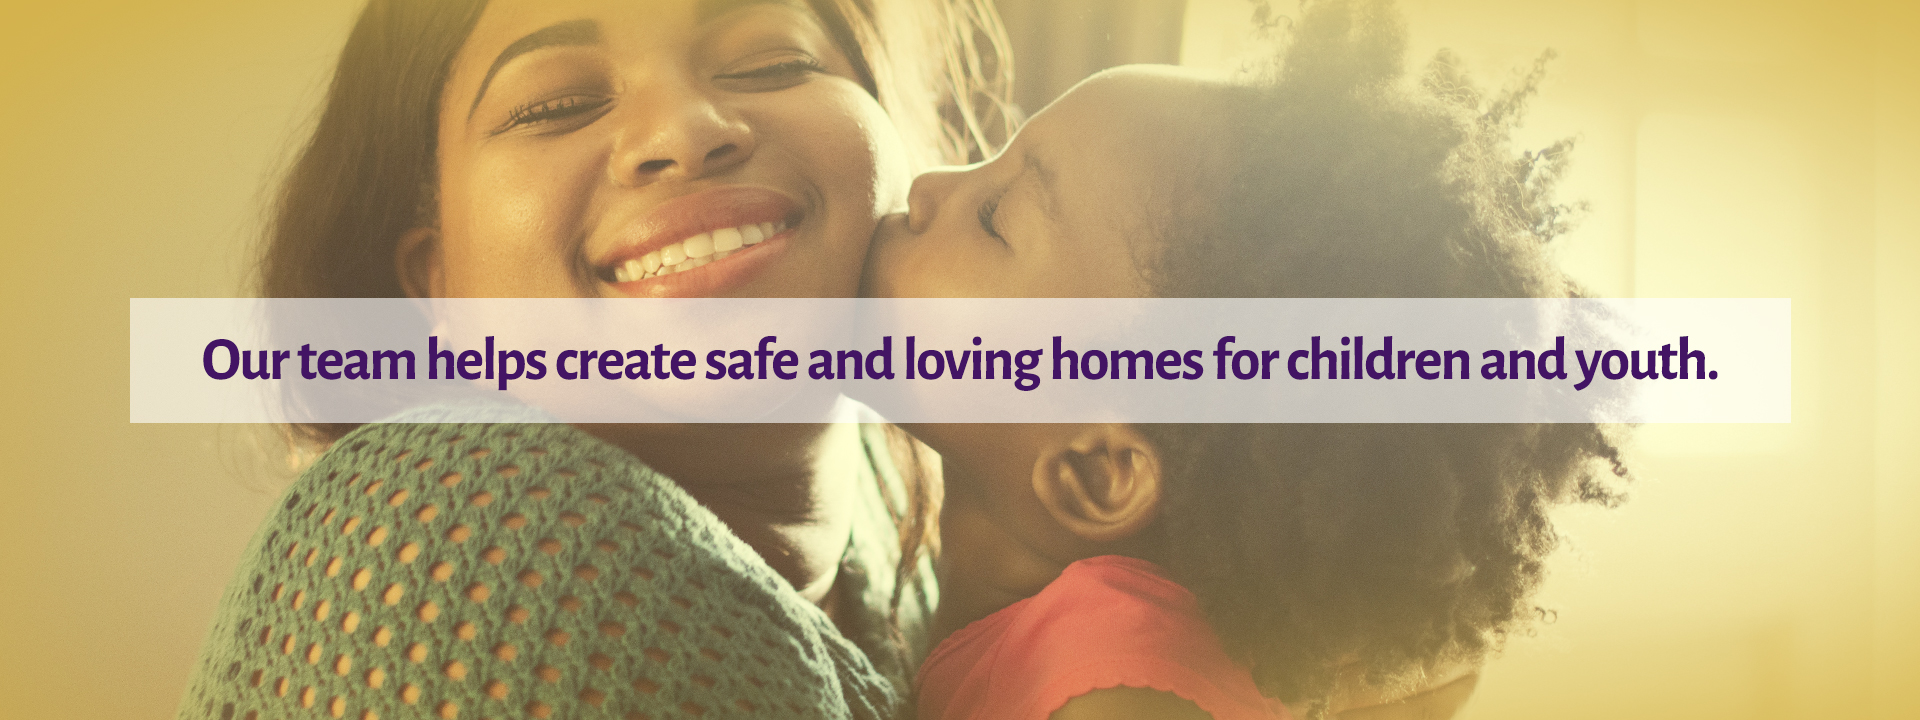 Our team helps create safe and loving homes for children and youth.